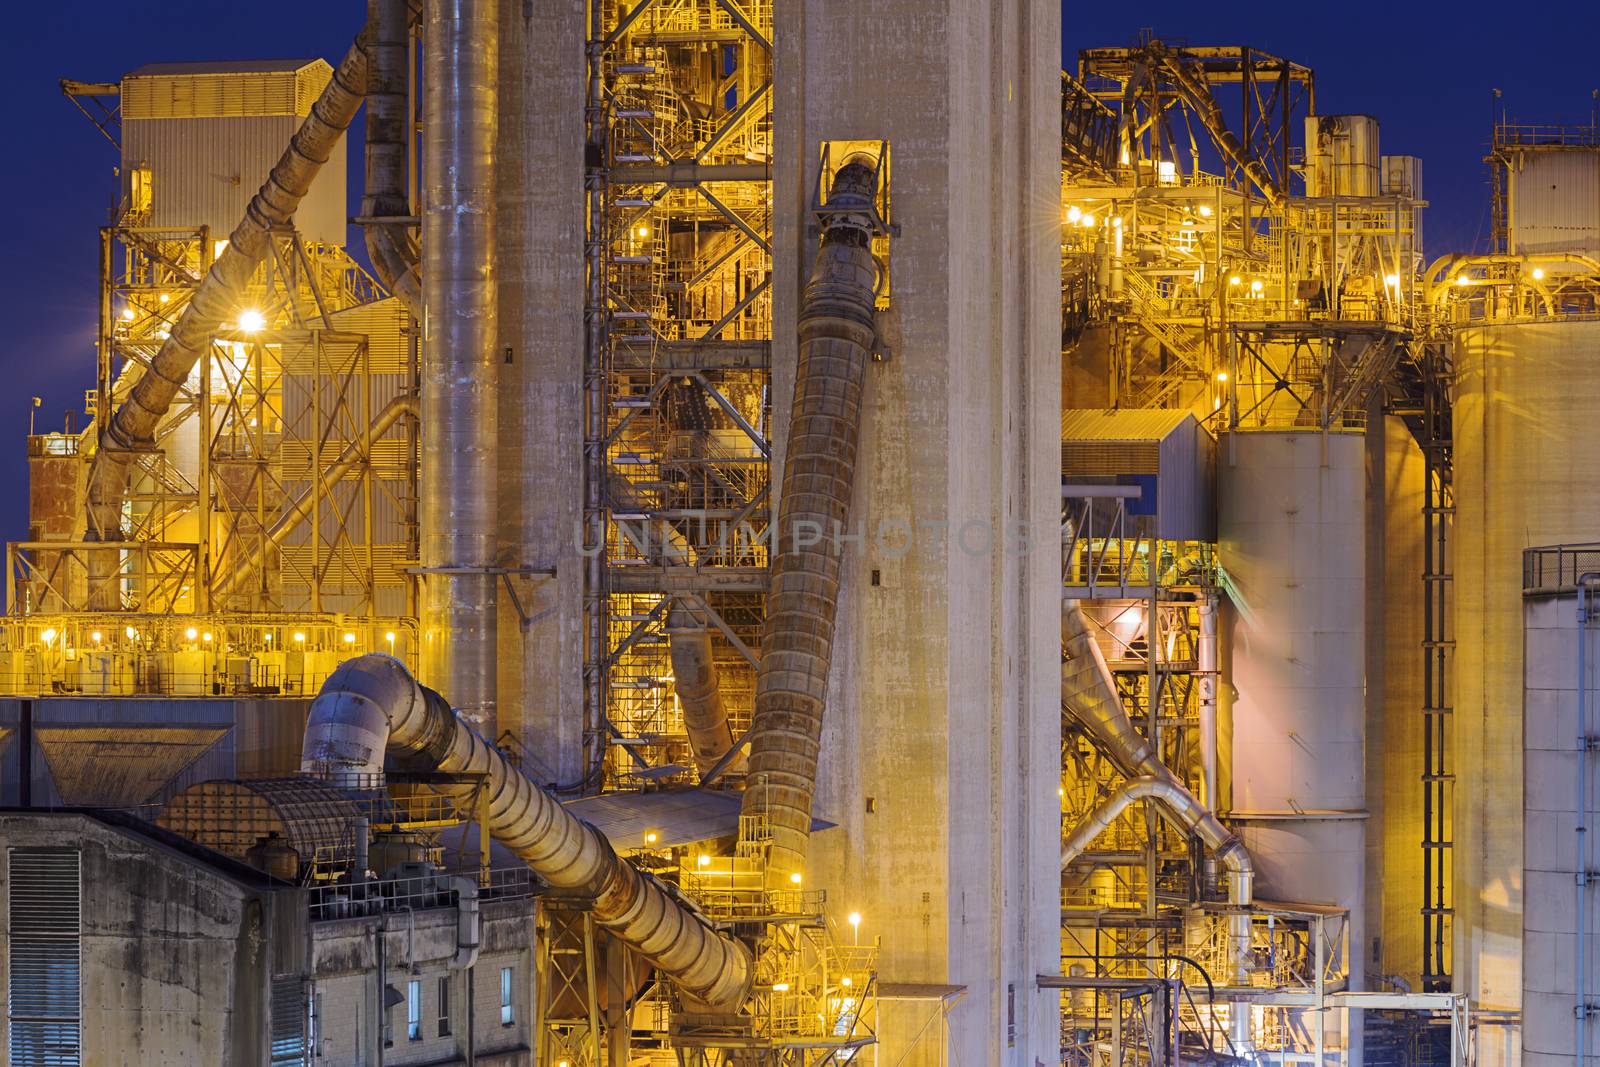 Hong Kong Cement plant by cozyta